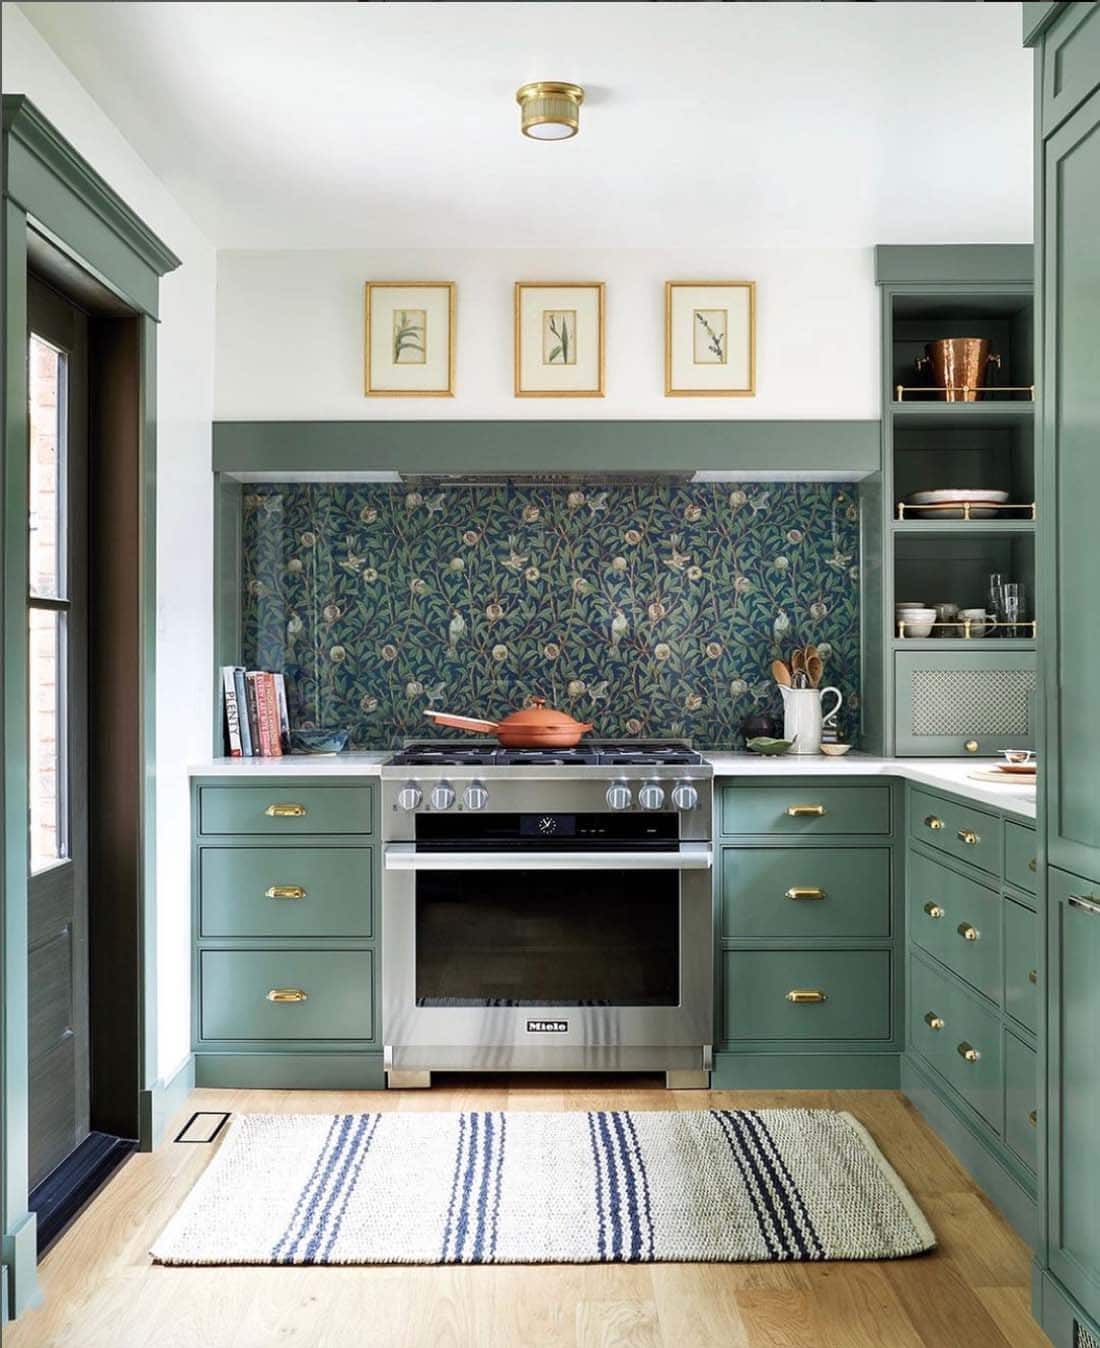 bright-cheerful-green-kitchen-cabinets-in-farrow-and-ball-green-smoke-cabinet-color